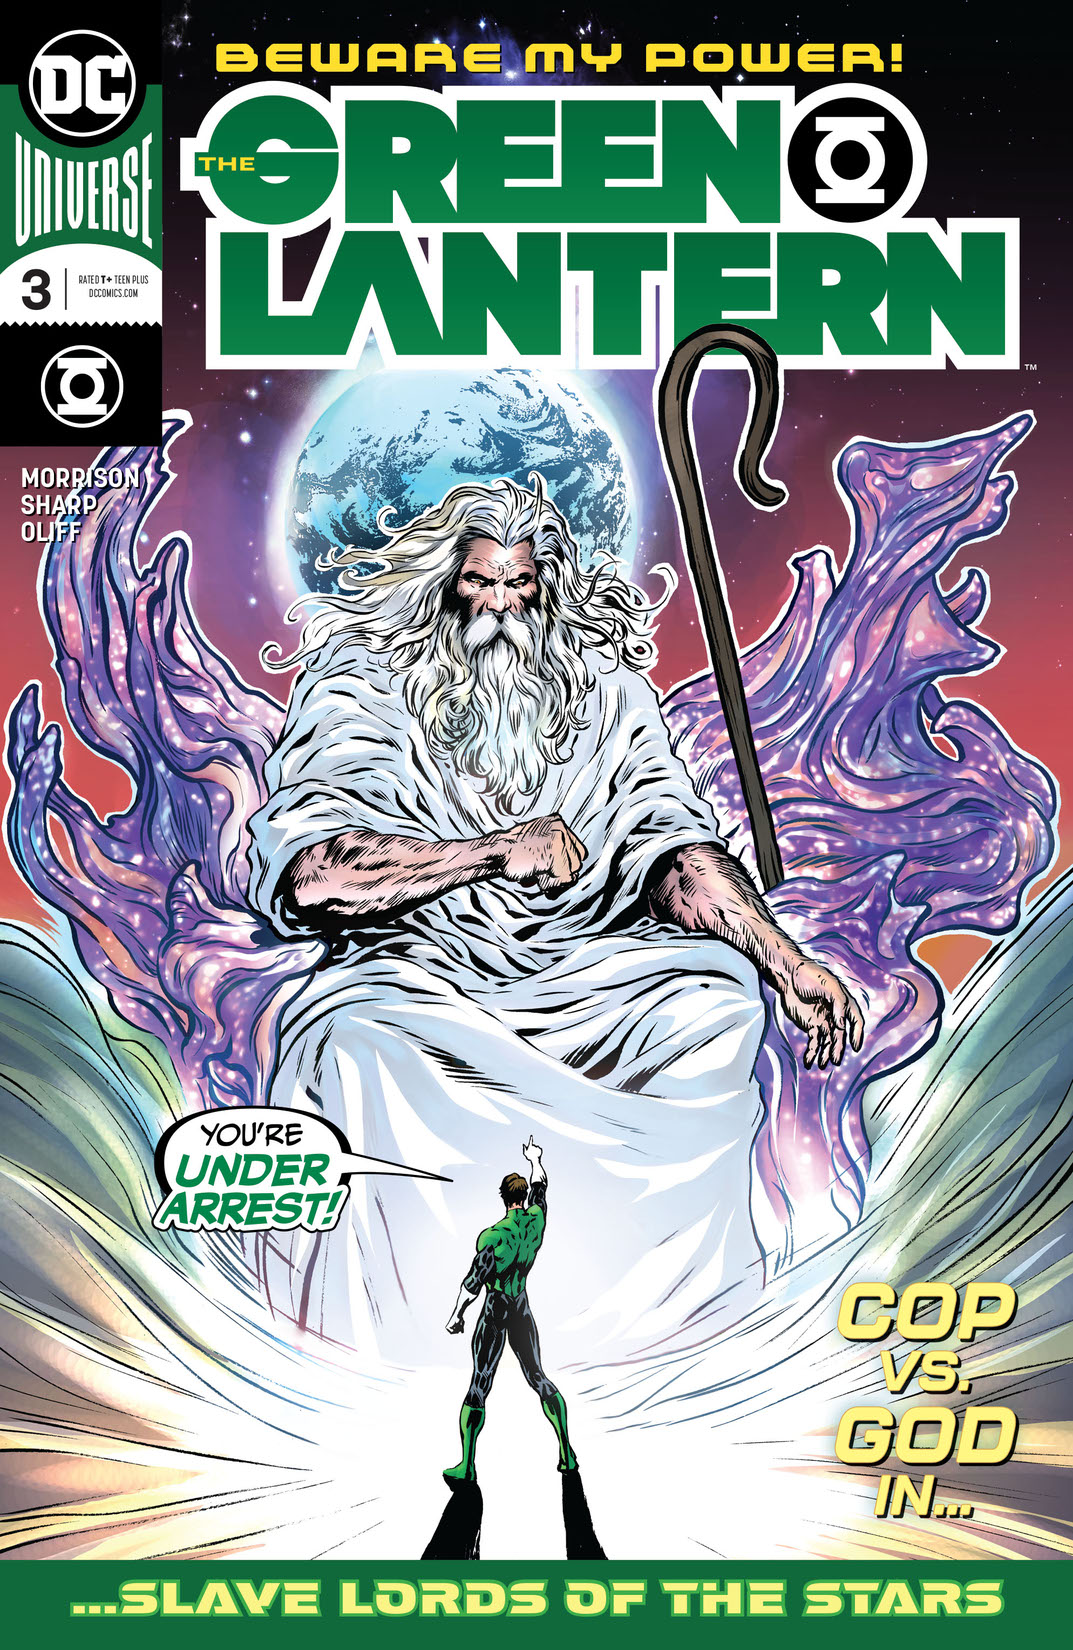 The Green Lantern (2018-) #3 preview images